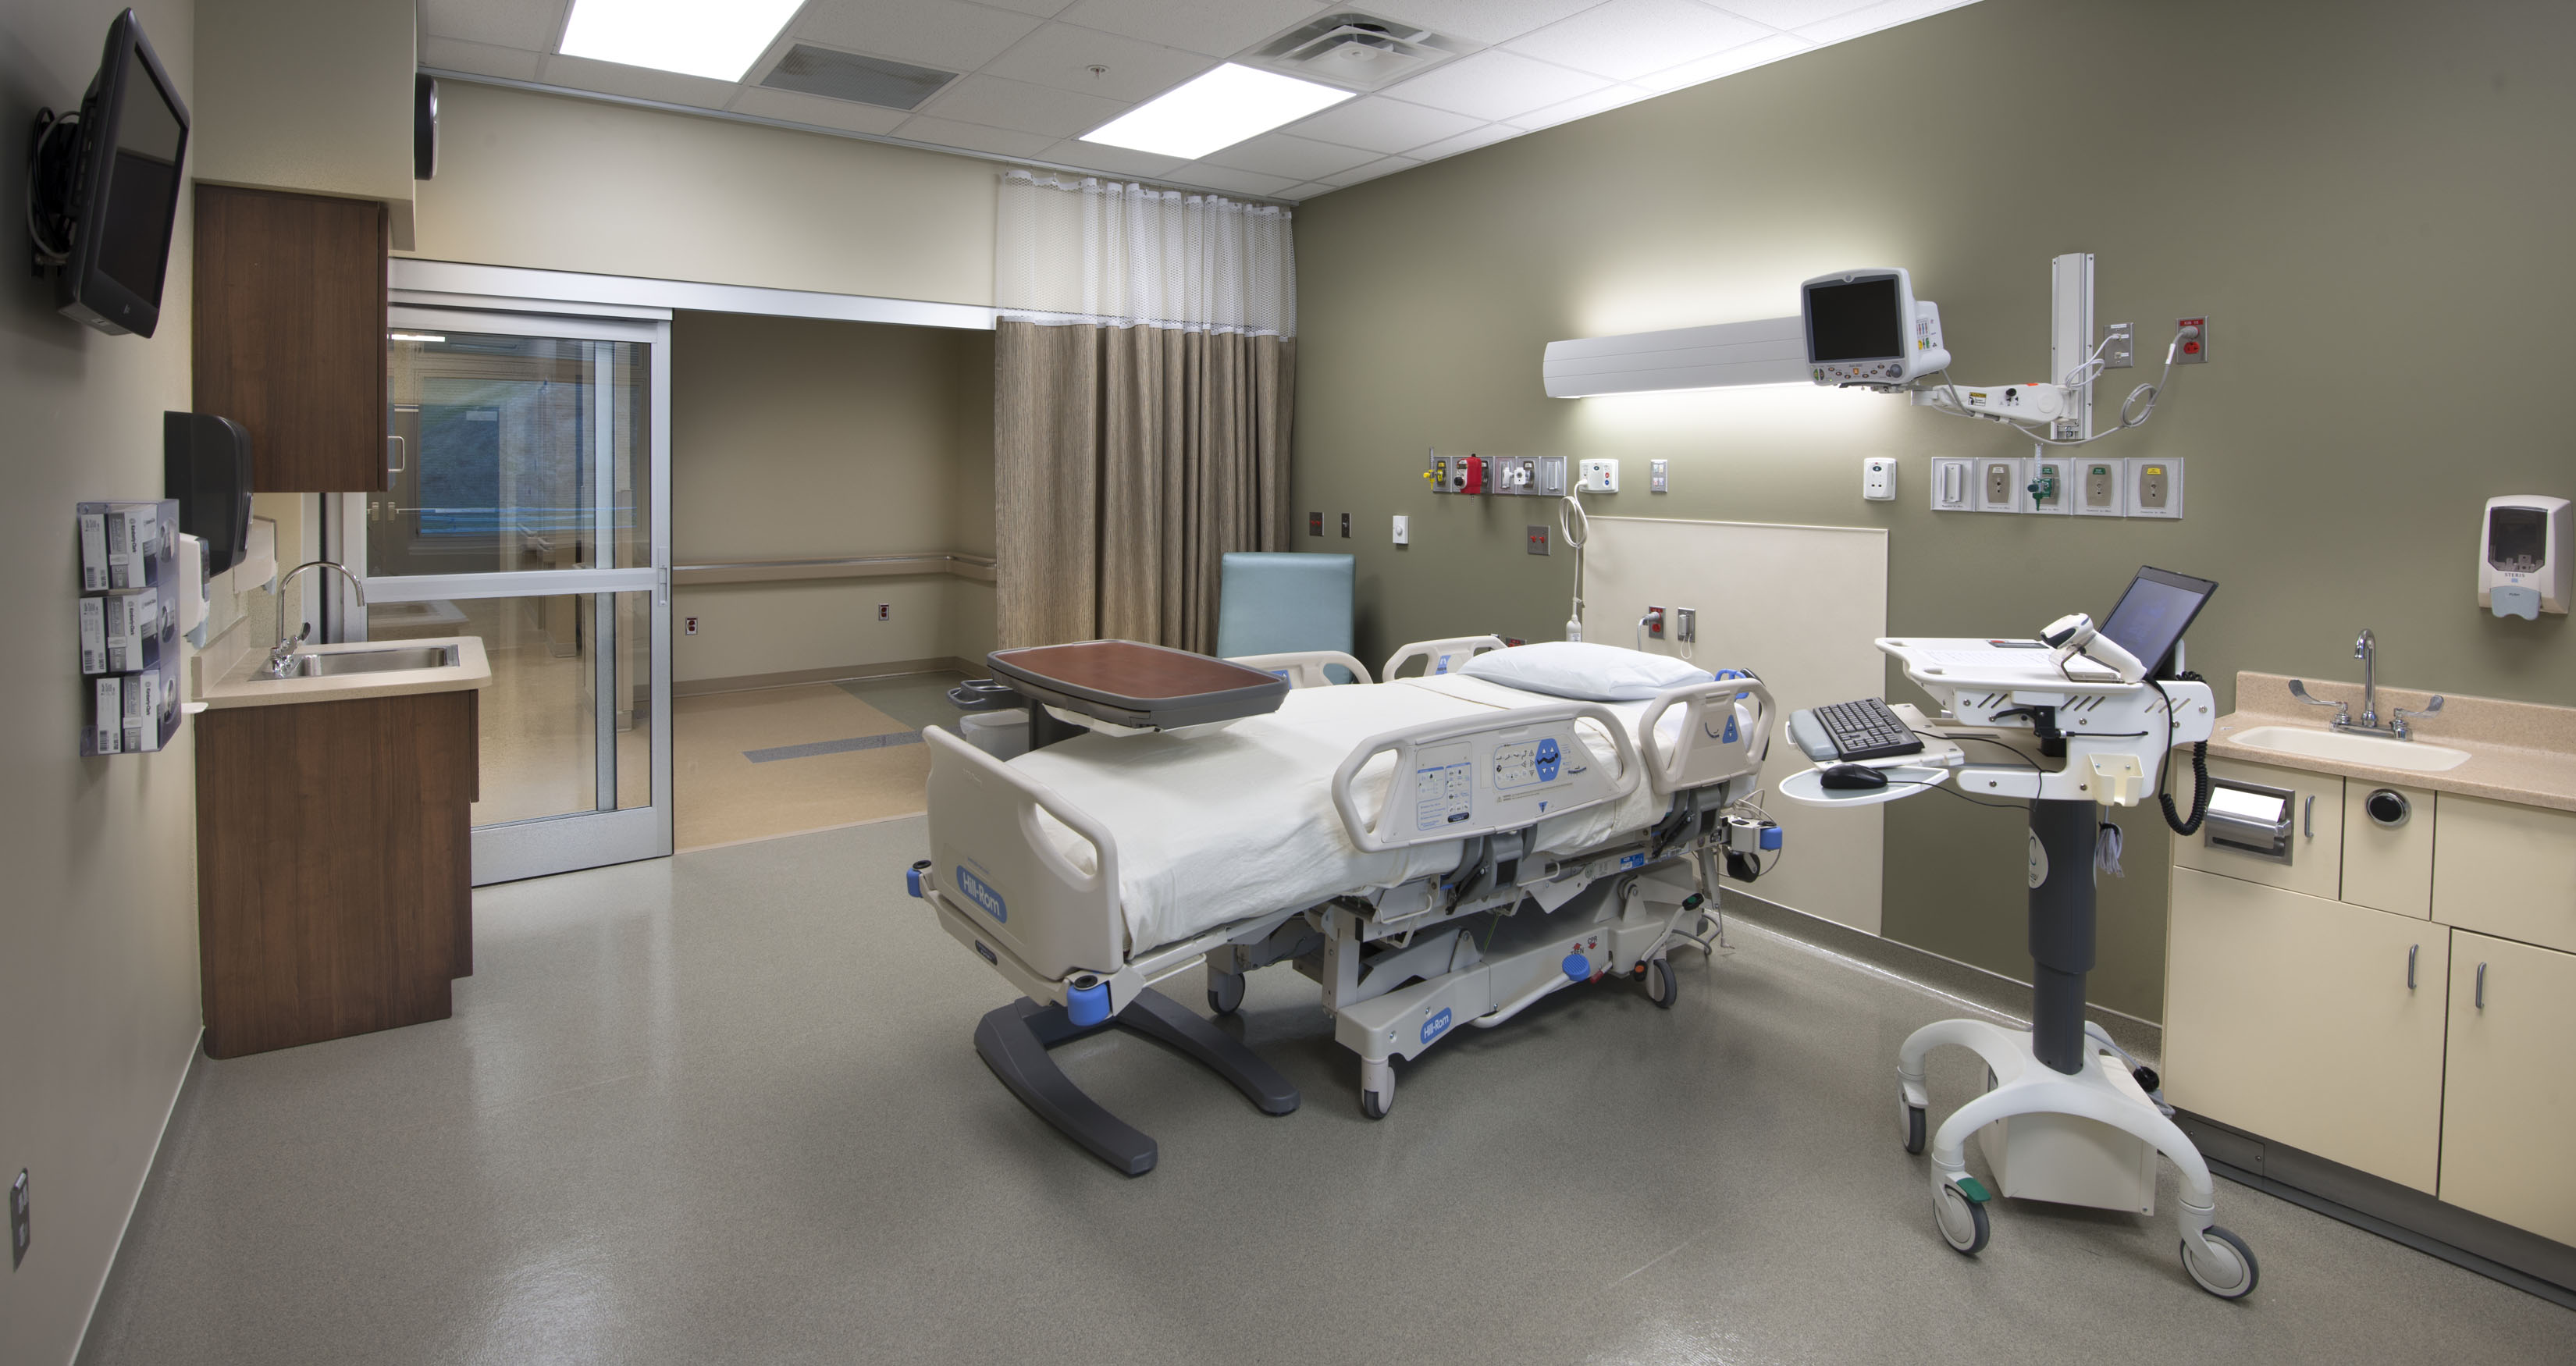 An intensive care unit with a bed, a desk, and some functional machines